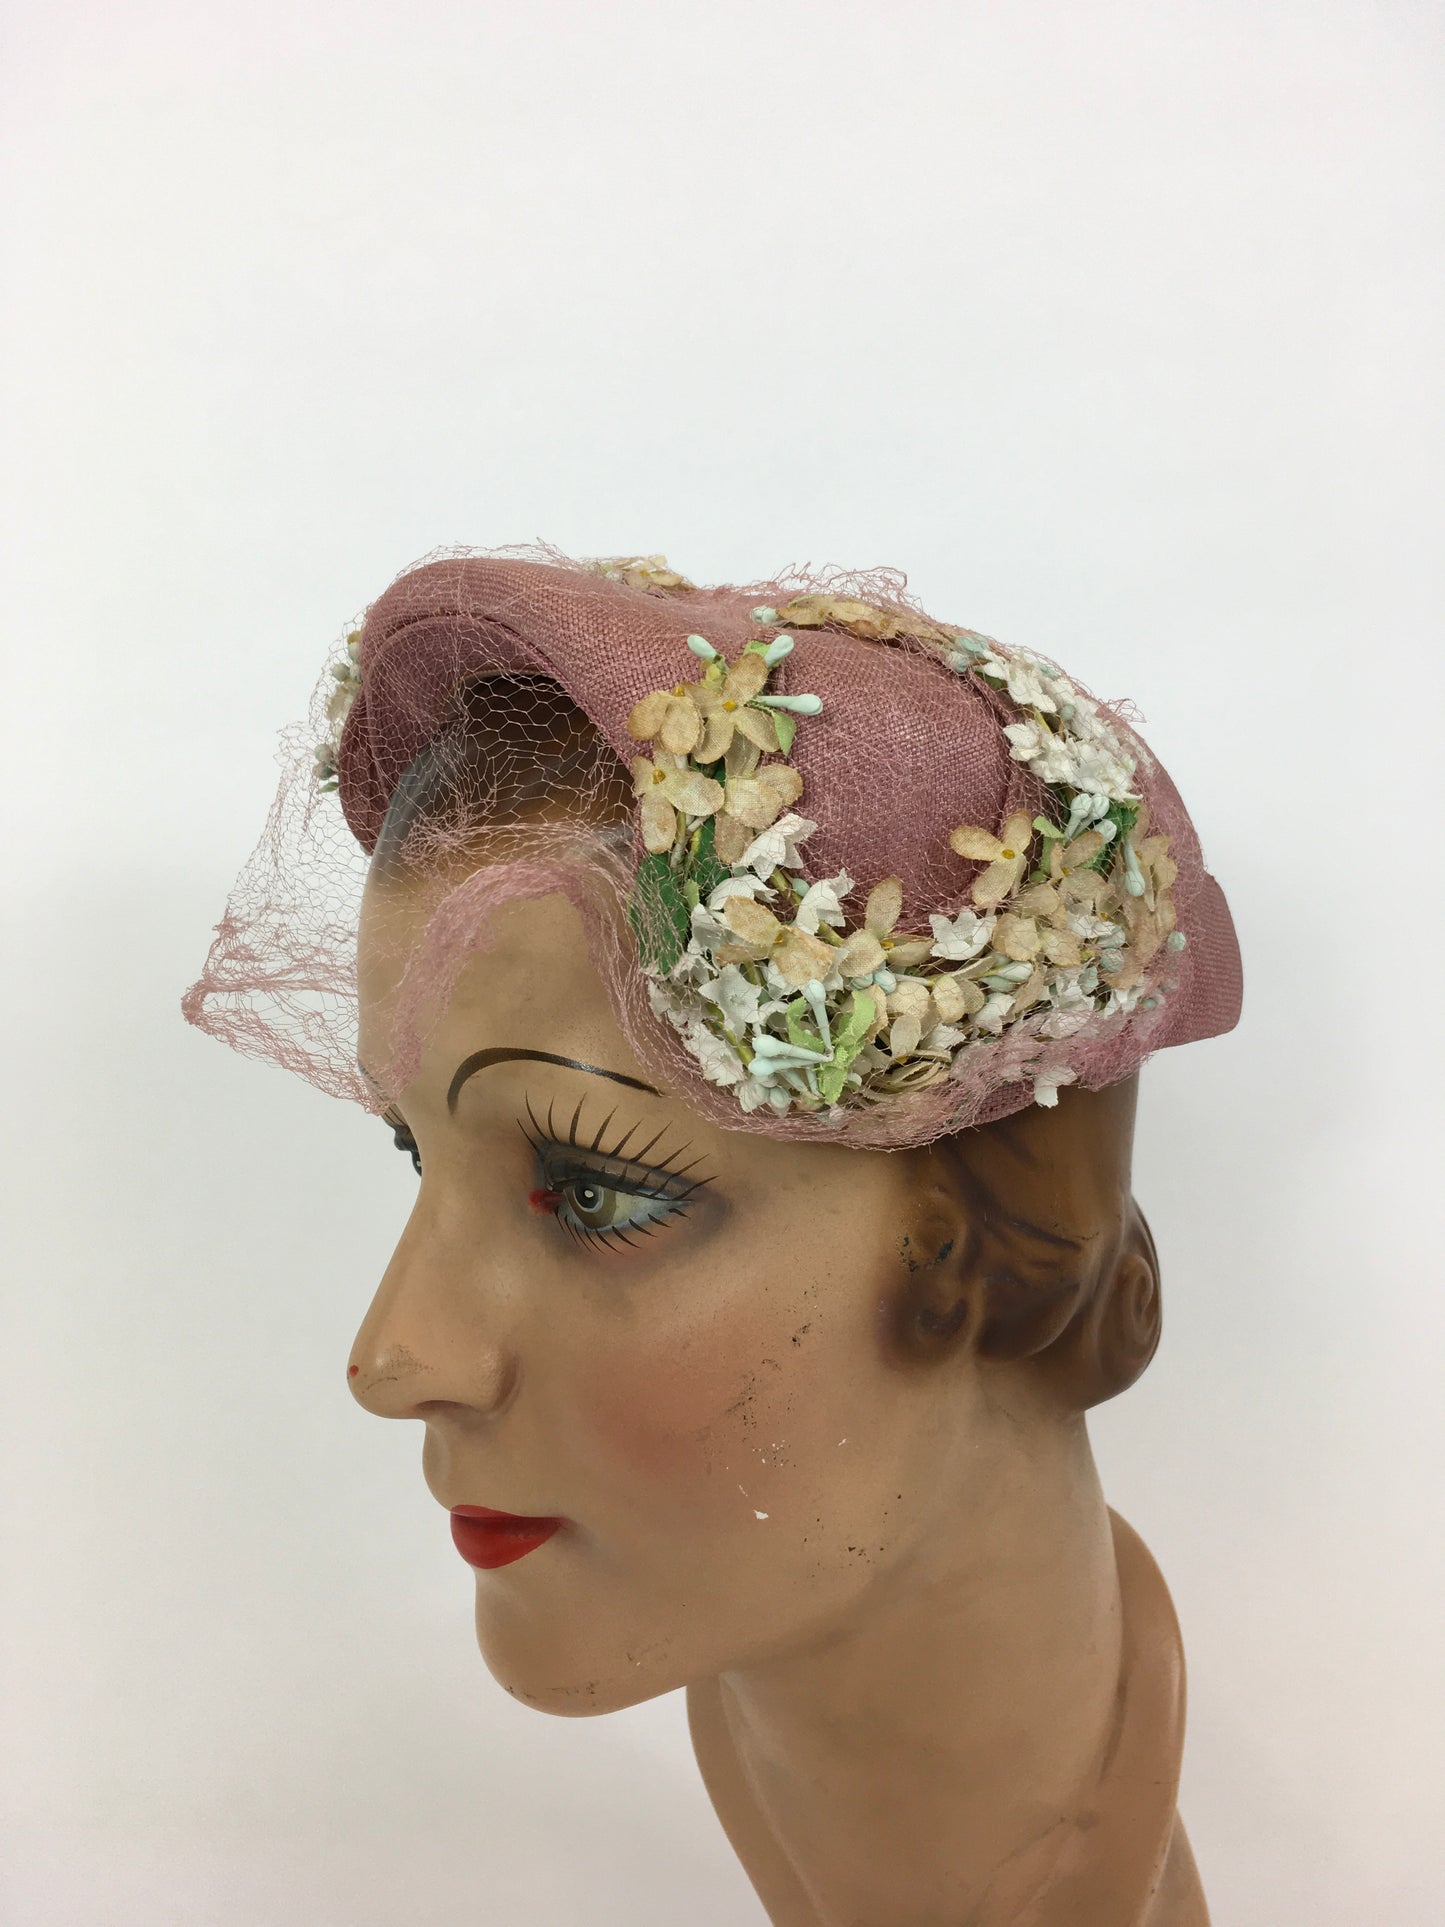 Original 1940’s Darling Powdered Rose Pink Hat - With Veiling and Beautiful Millinery Flower Embellishments